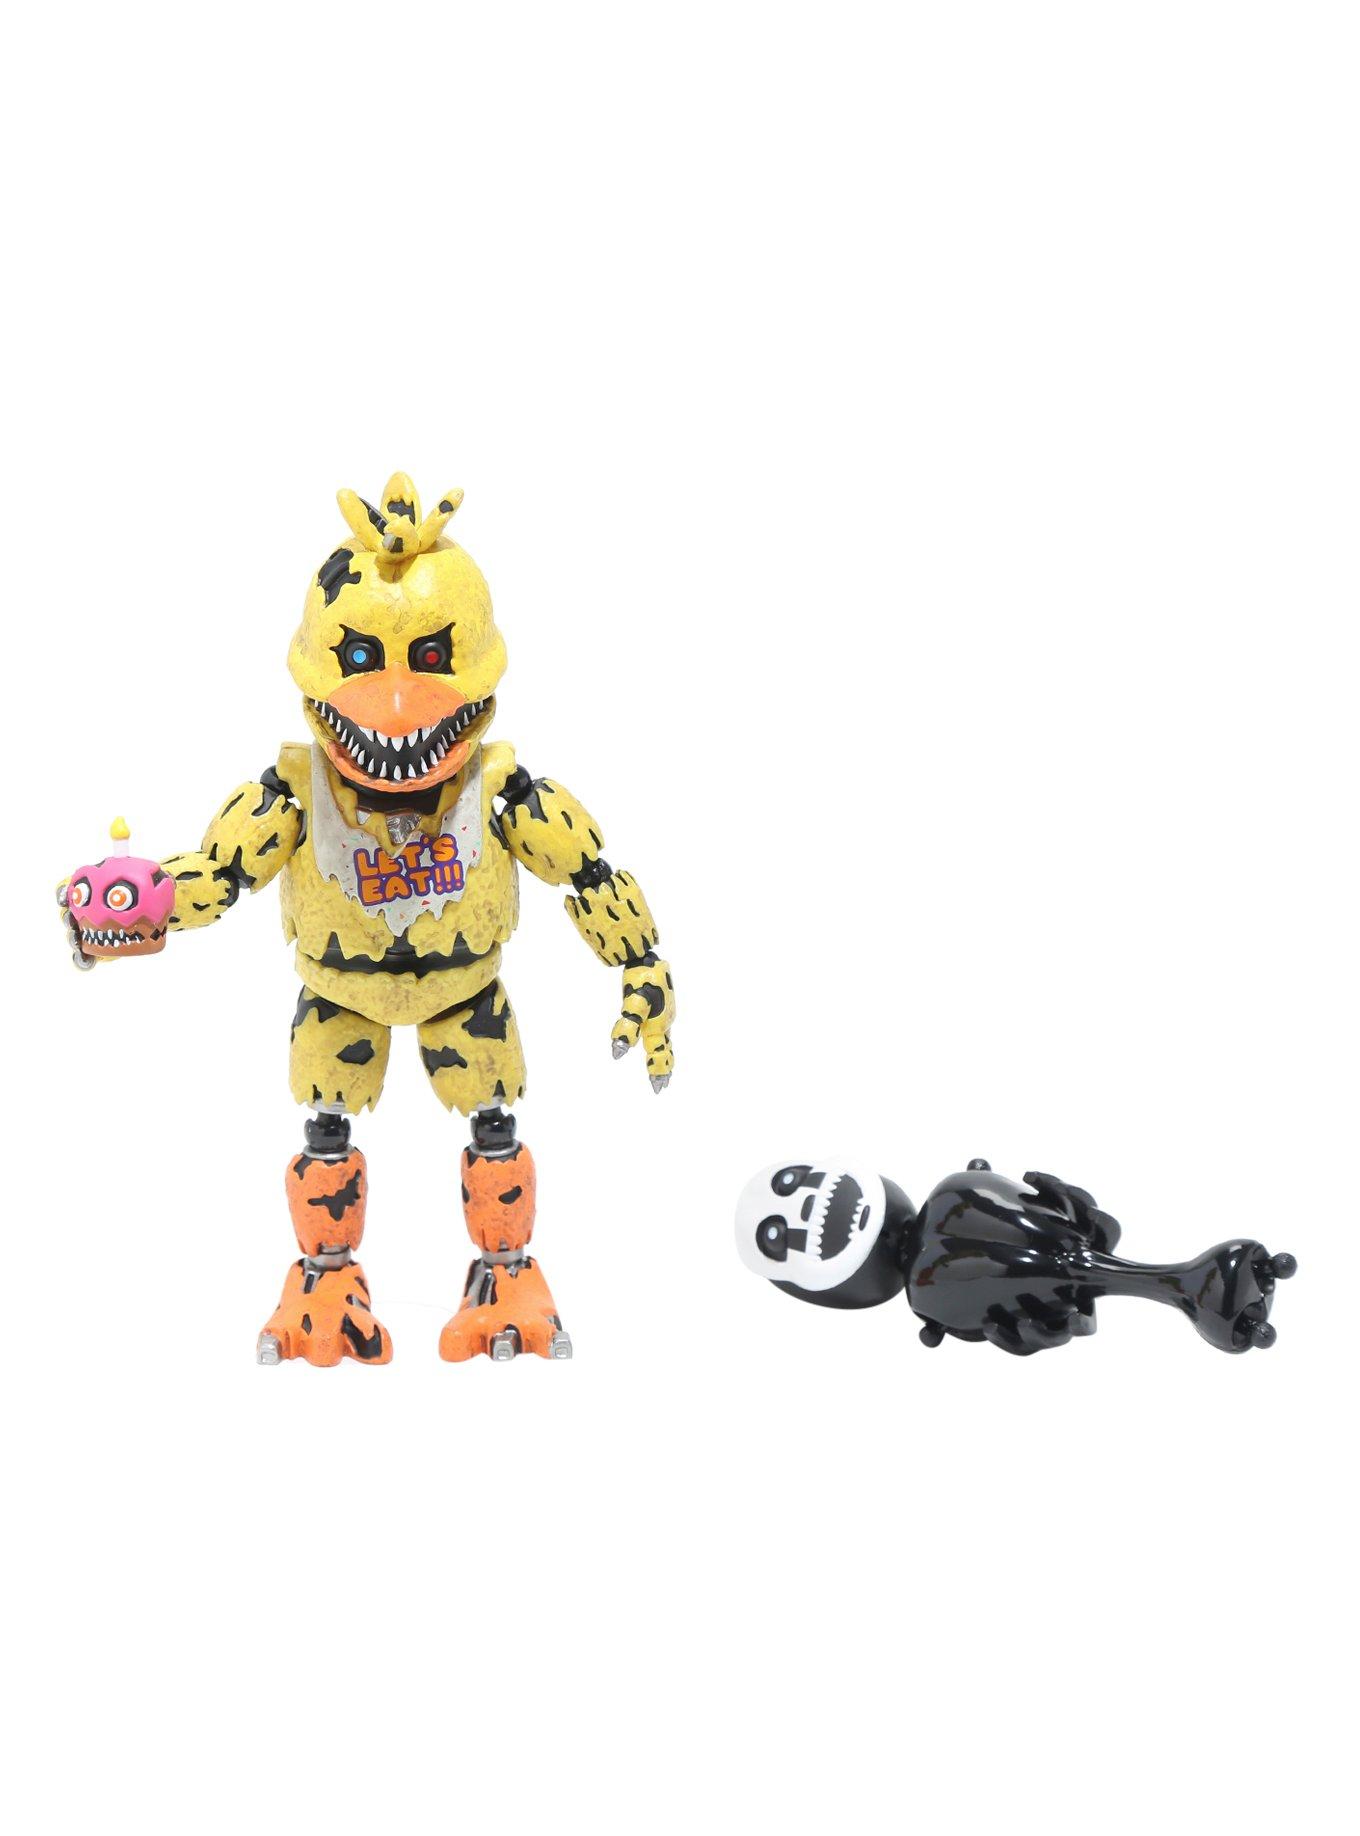 Five Nights at Freddy's FNAF Sister Location Action Figure Nightmare Chica  Funko 